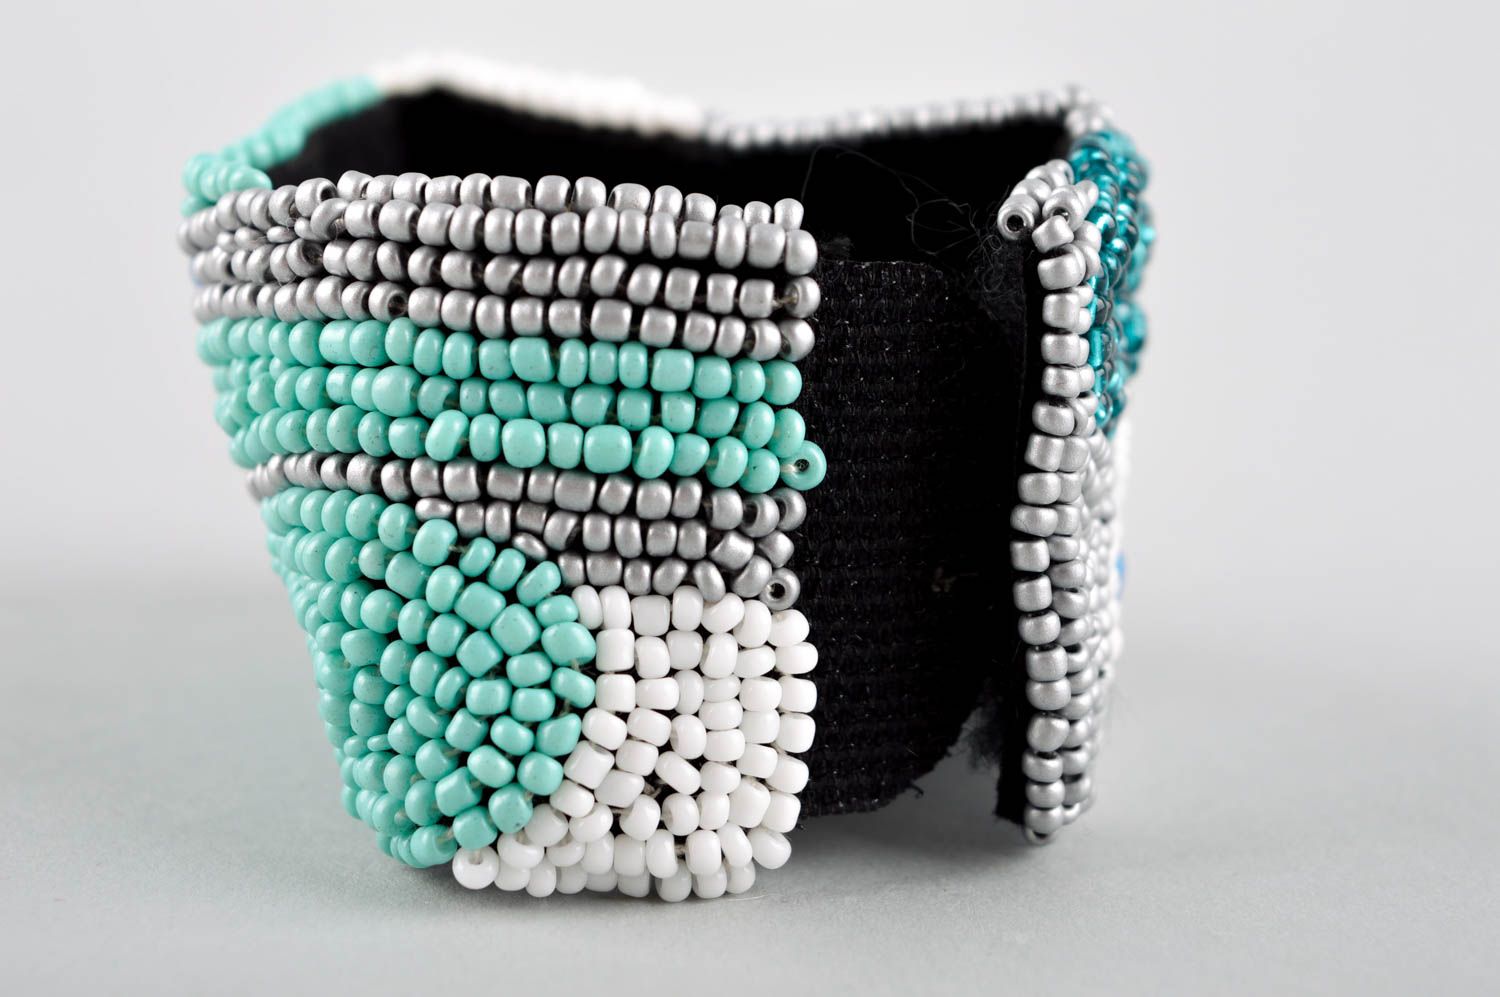 Stylish handmade beaded wide wrist bracelet in turquoise, white and black colors photo 4